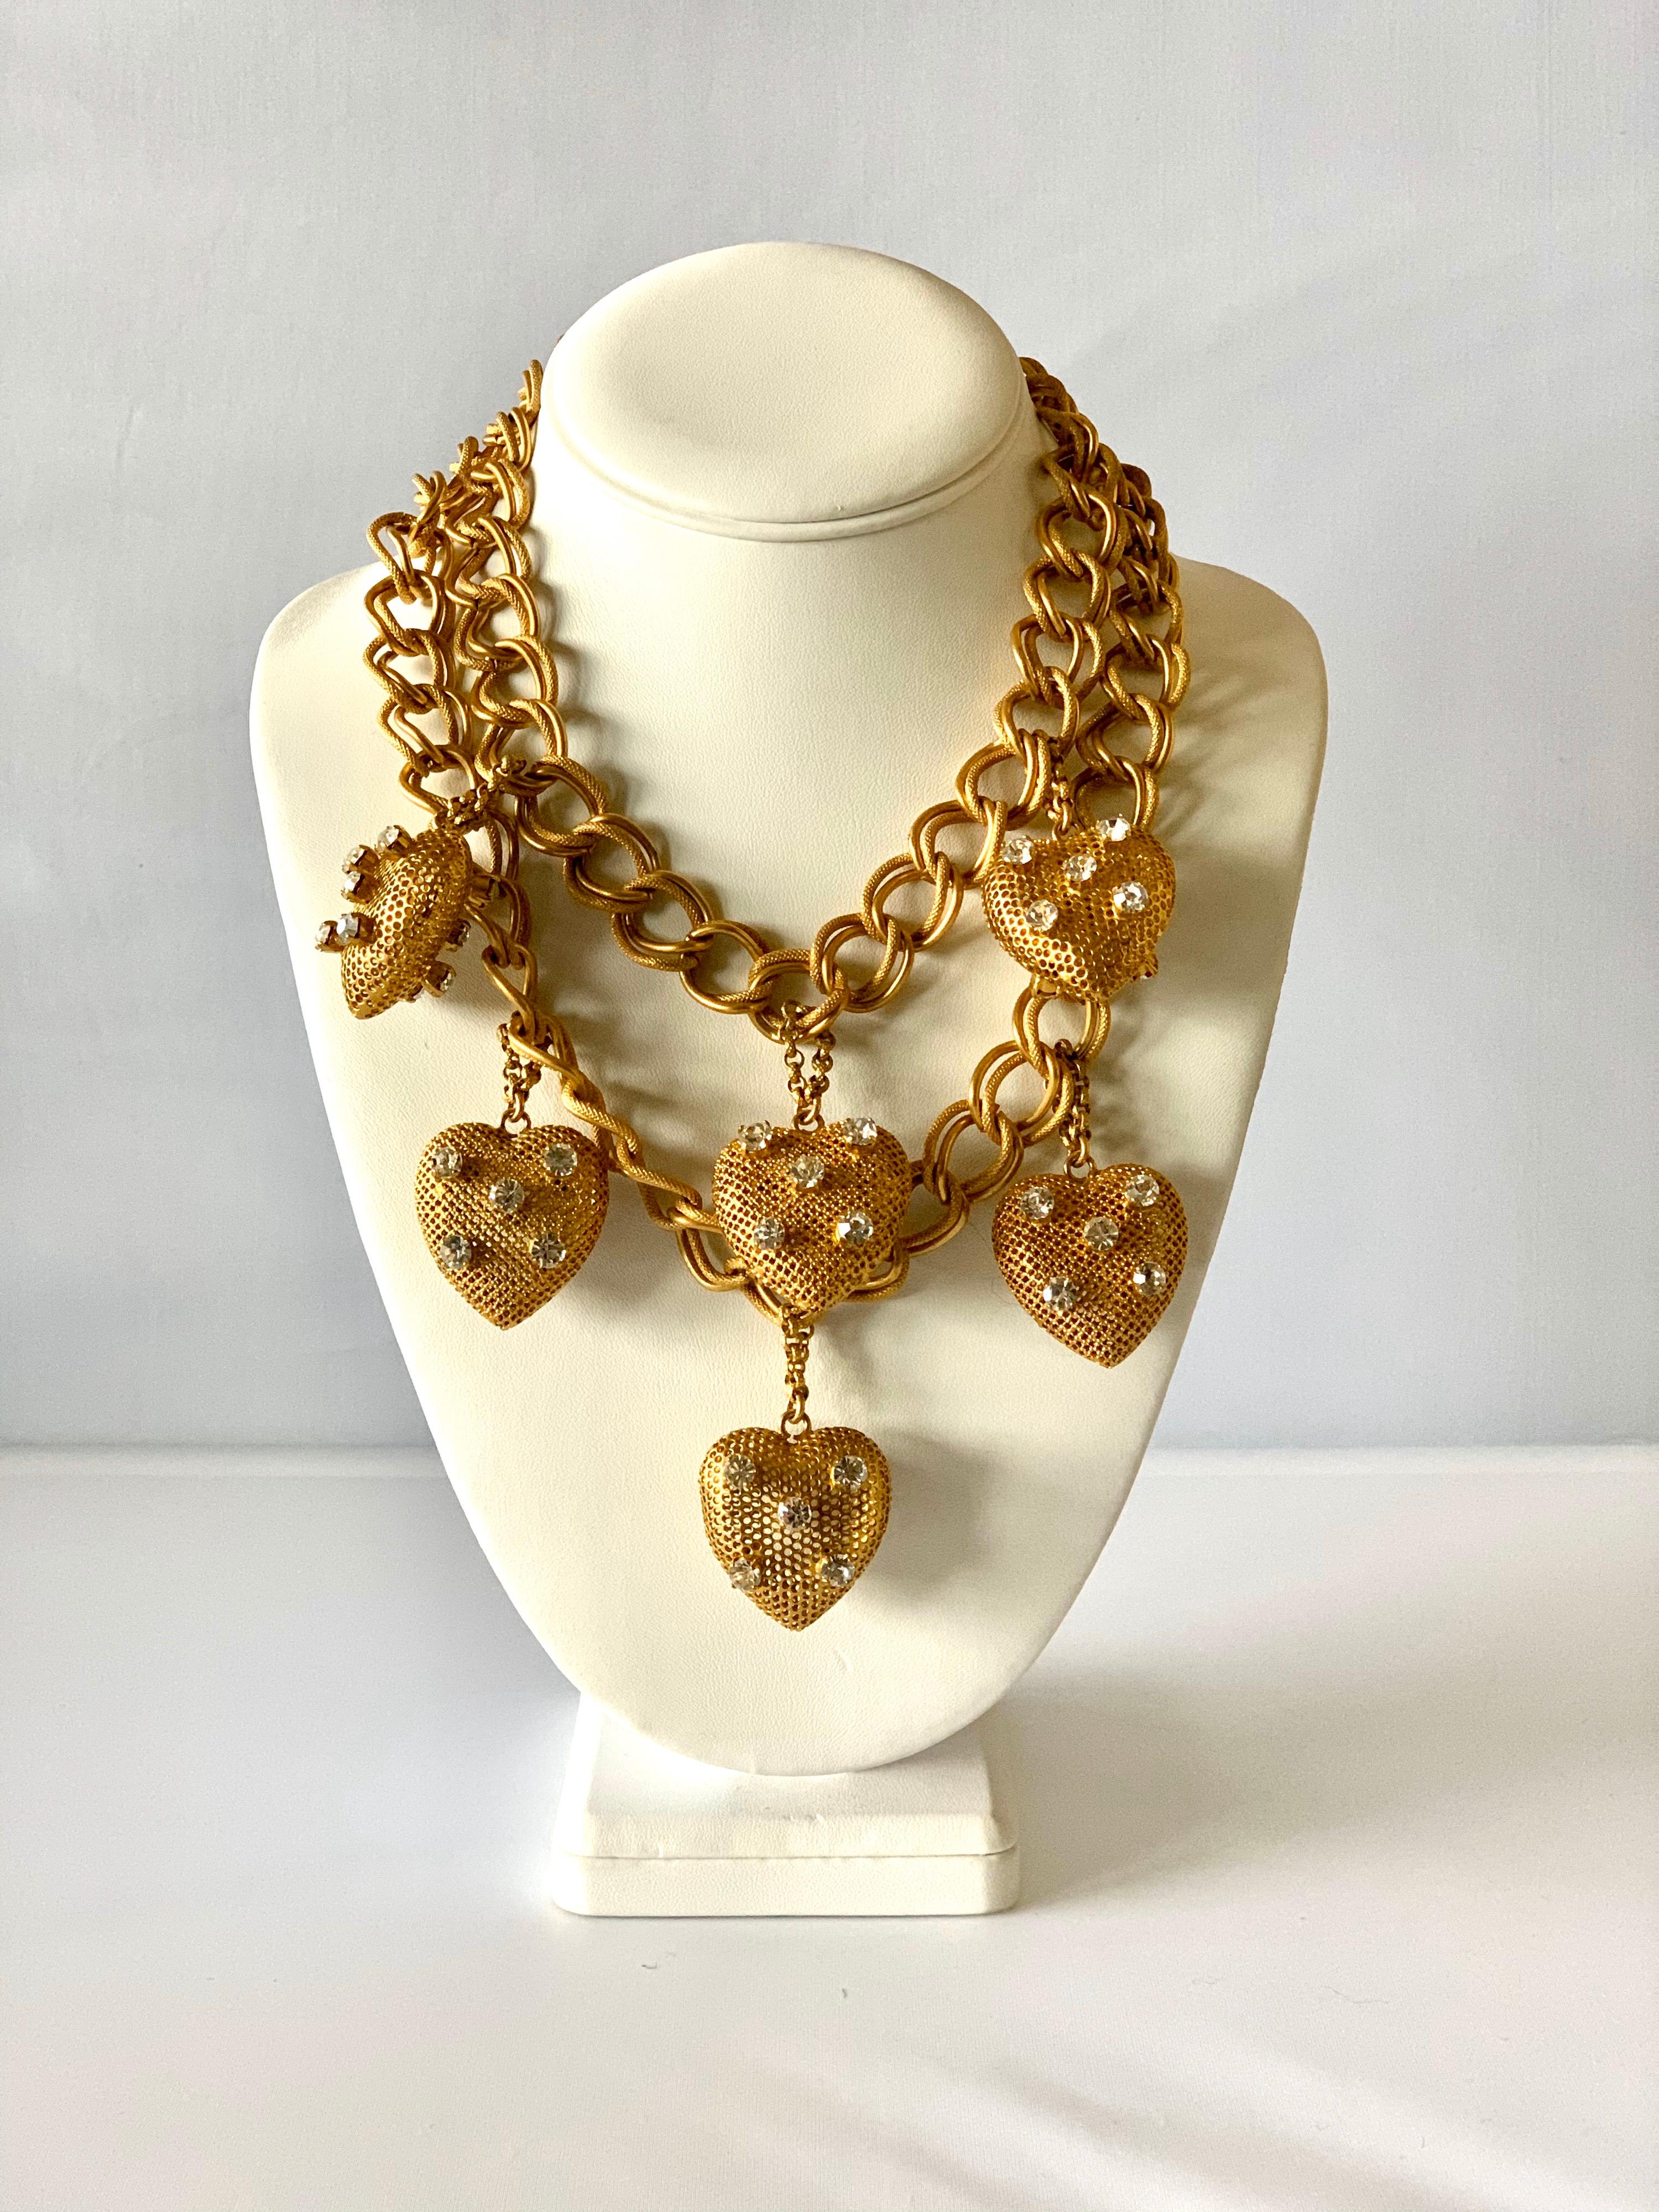 Vintage gilt chain and diamante heart bib statement necklace - comprised out of two chunky gold-tone chains which are adorned by six three-dimensional hearts covered in rhinestones. The necklace was designed by Dominique Aurientis, Paris, circa